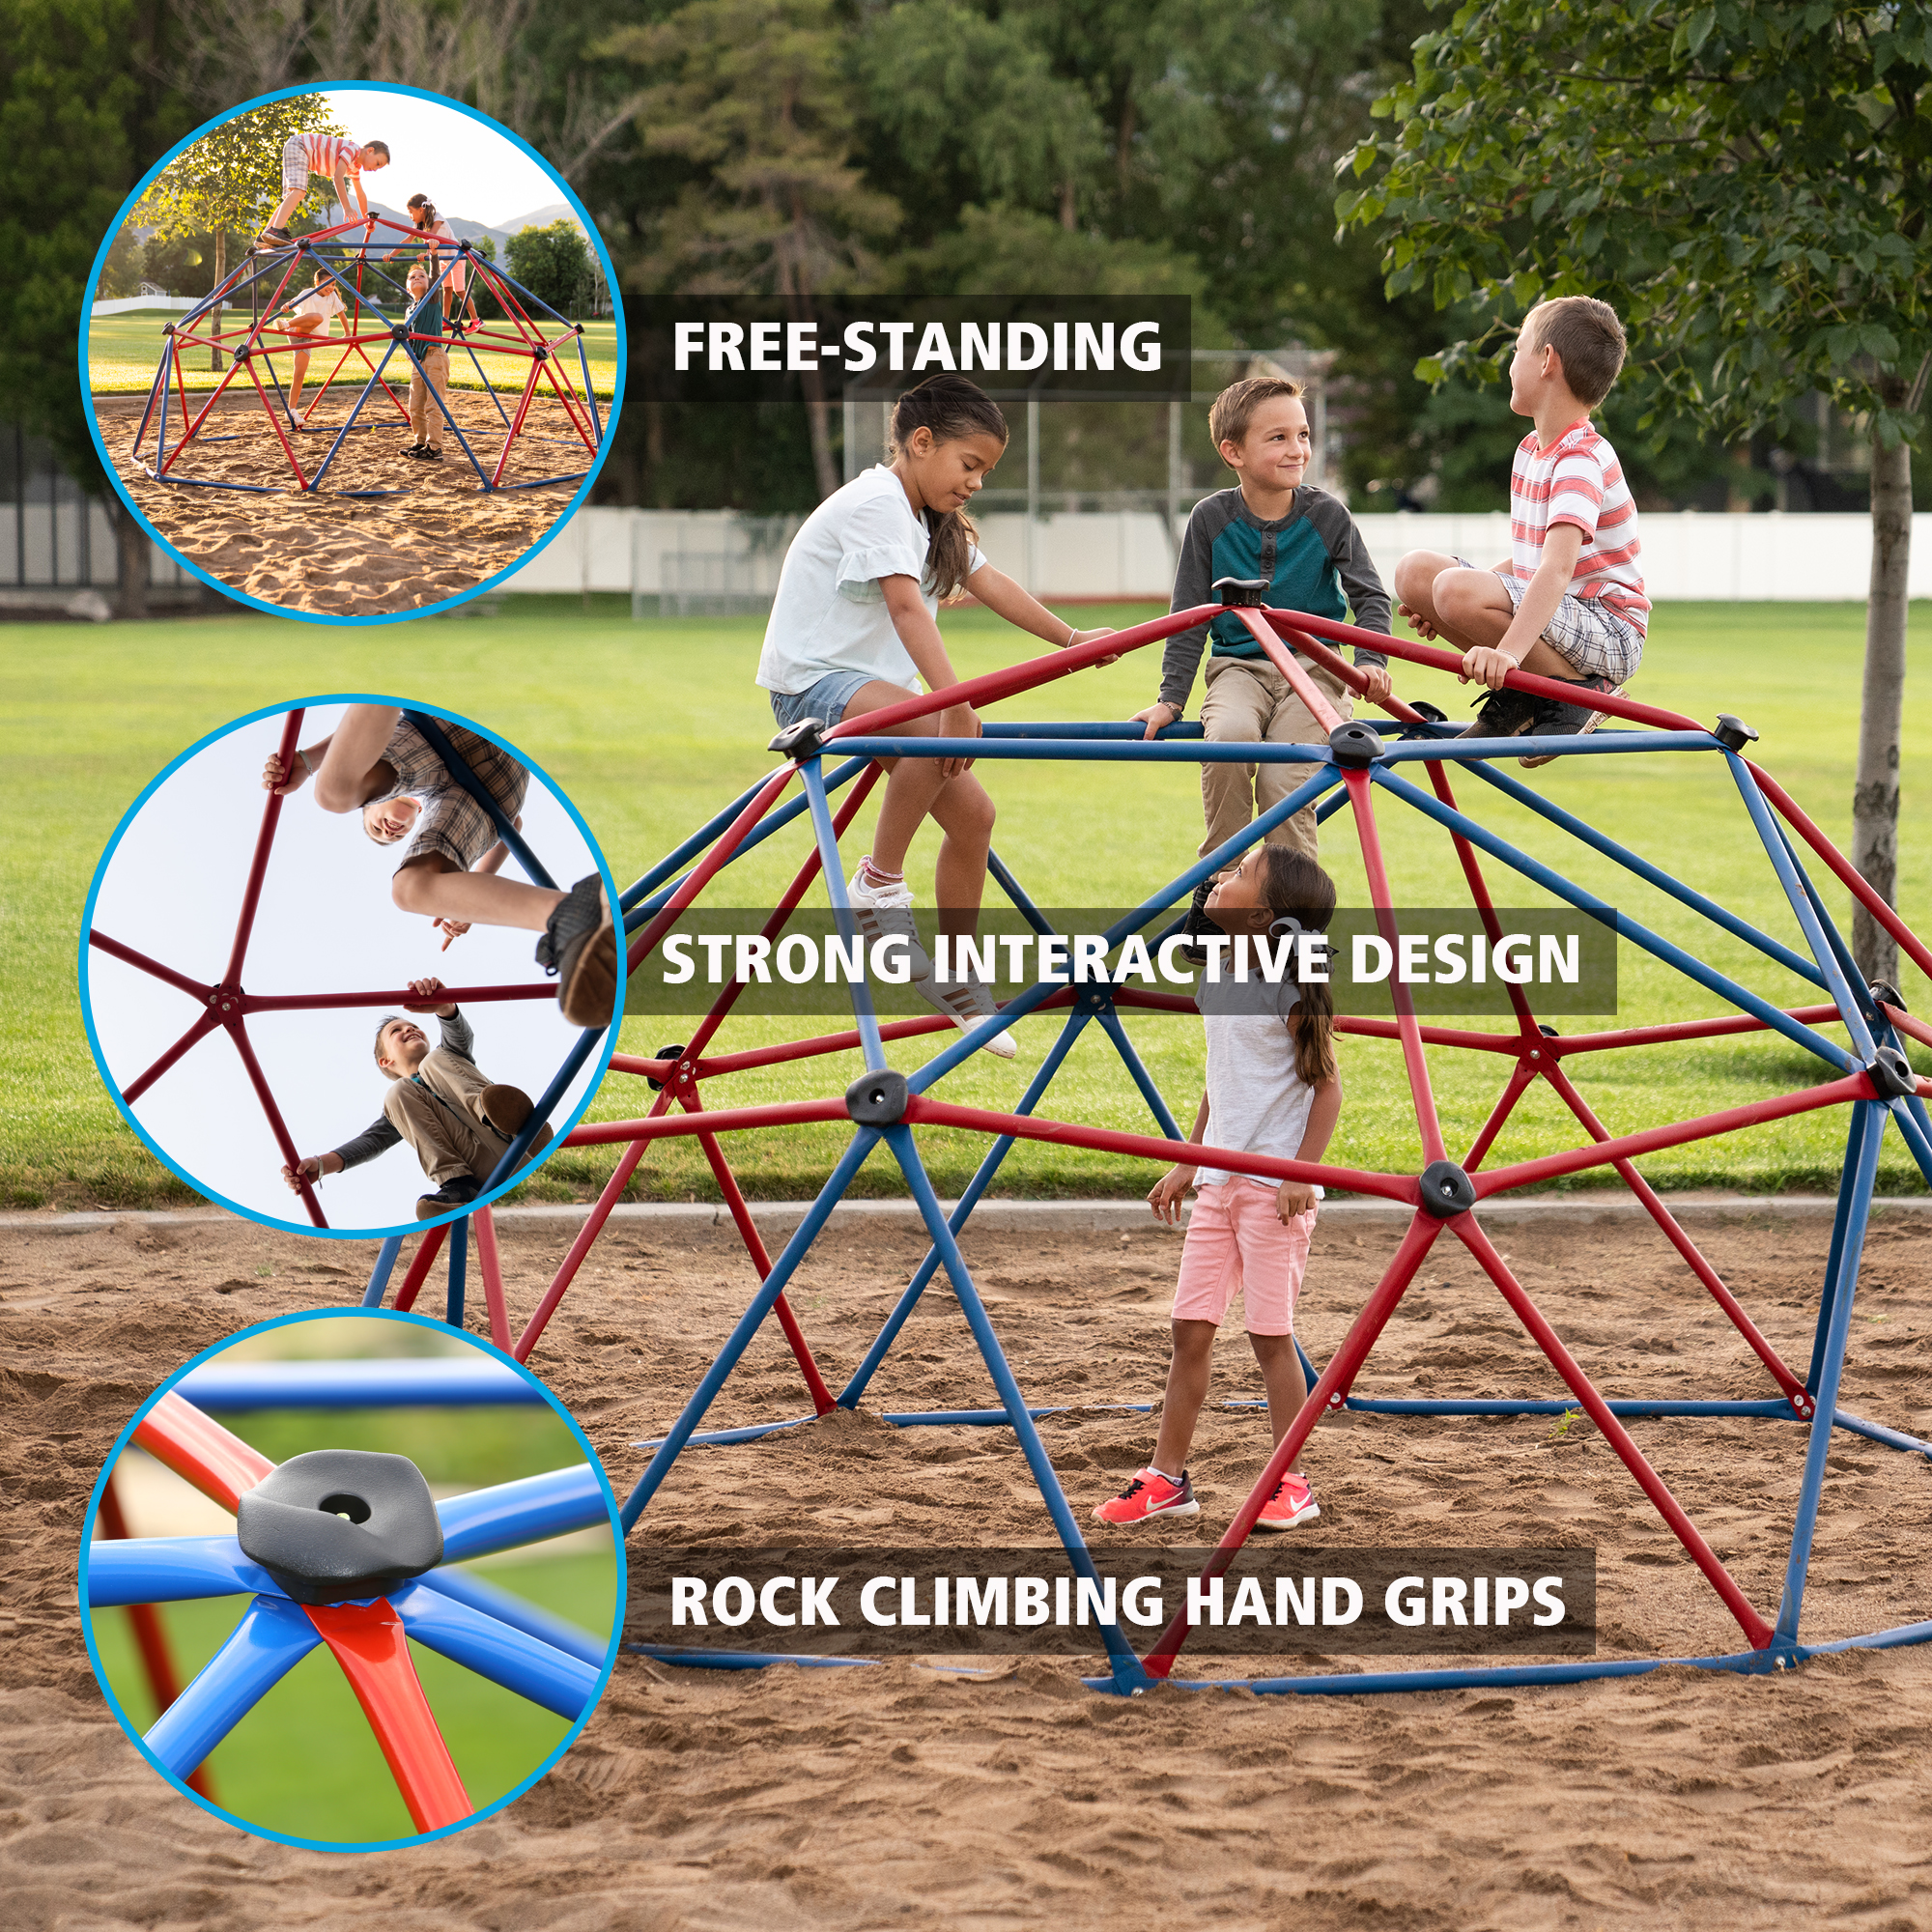 Lifetime Kid's Outdoor 5 ft. H x 10 ft. W Dome Climber, Red and Blue (101301) - image 3 of 11